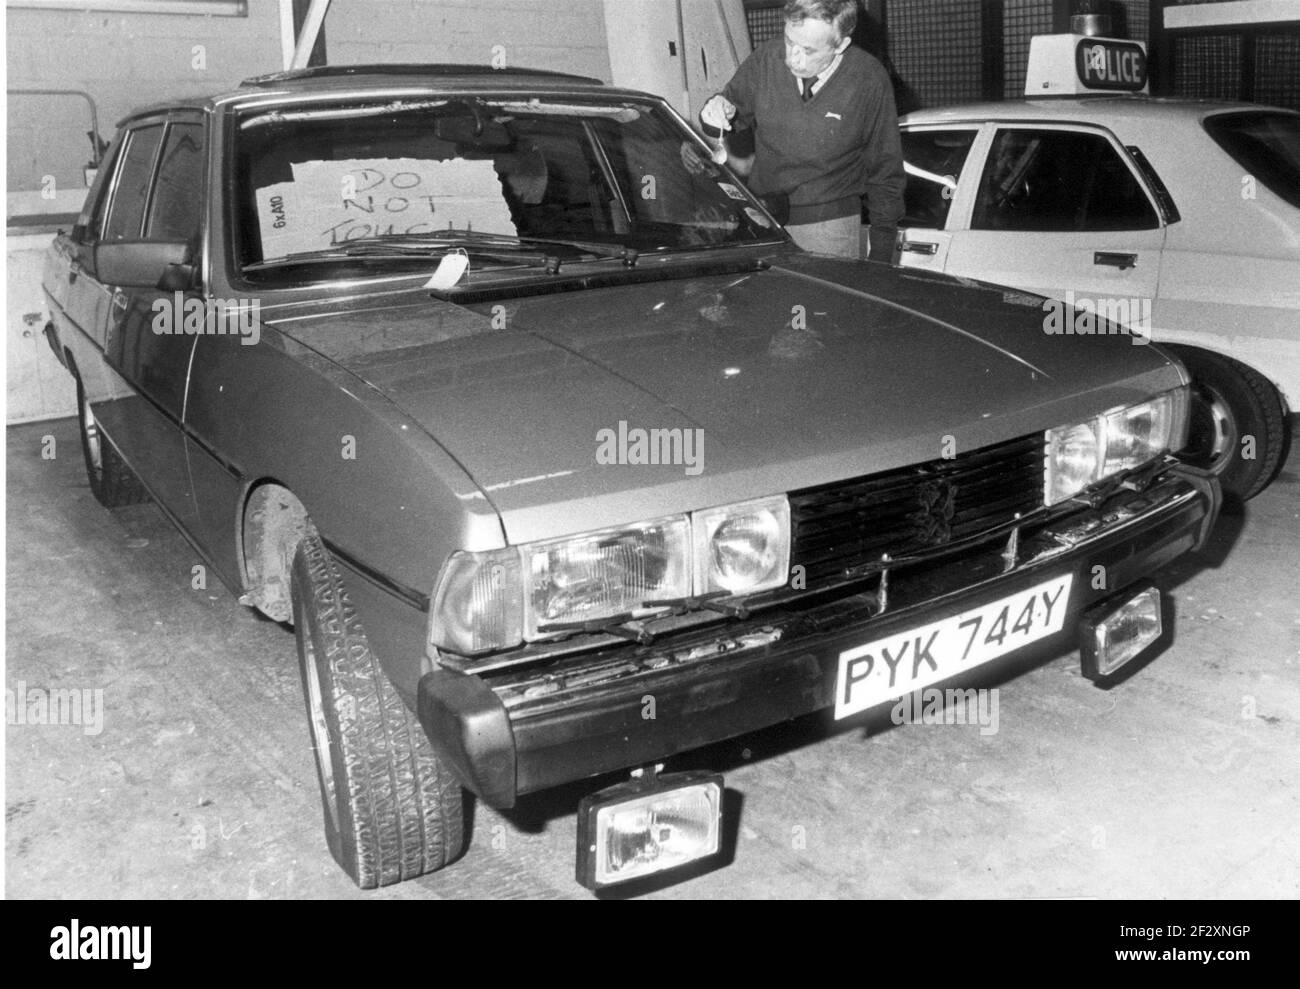 THE PEUGEOT CAR STOPPED BY PC'S TIMOTHY PHILLIPS AND BOB ELLIOTT WHICH  STARTED THE CAR CHASE THROUGH WEST SUSSEX AND HAMPSHIRE, BEING EXAMINED AT  LITTLEHAMPTON POLICE STATION BY FORENSIC EXPERTS. PIC MIKE